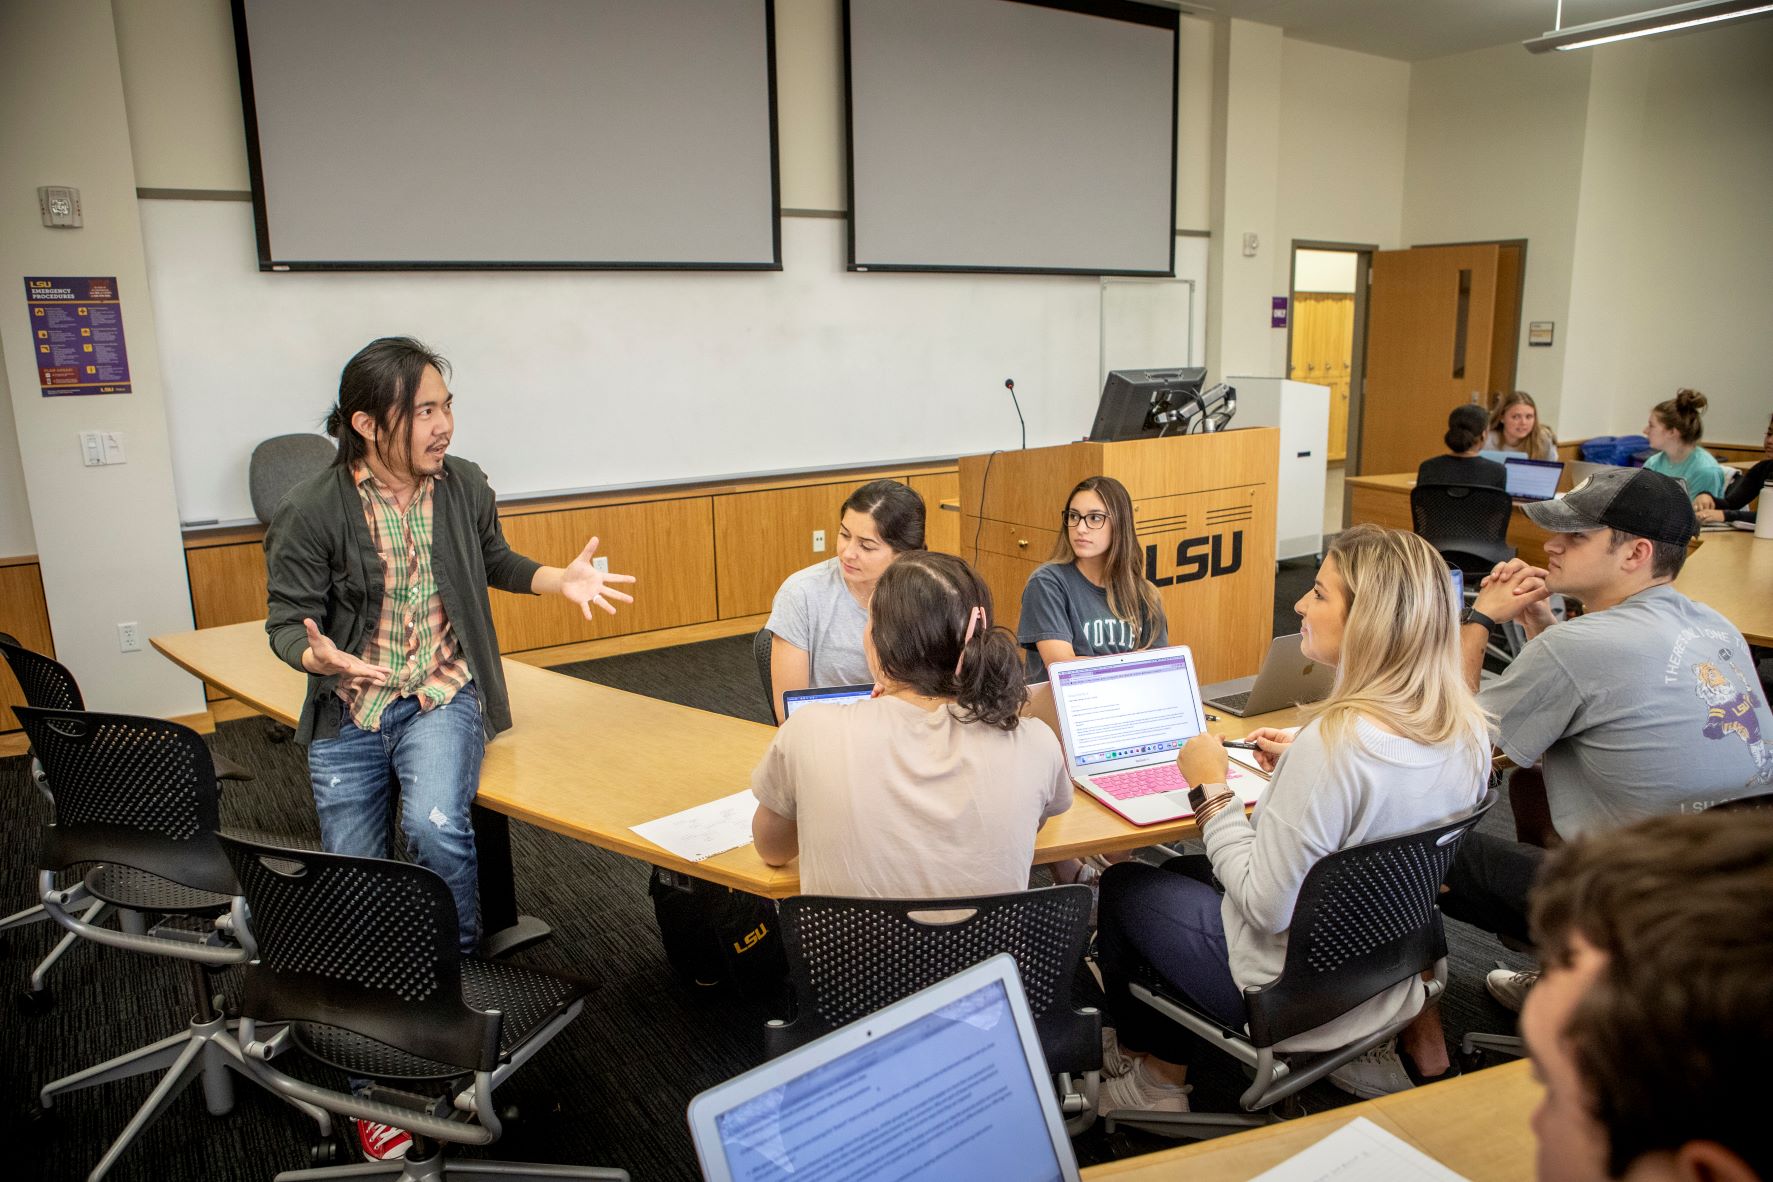 Professor Andrew Kuo leads students in a conversation.